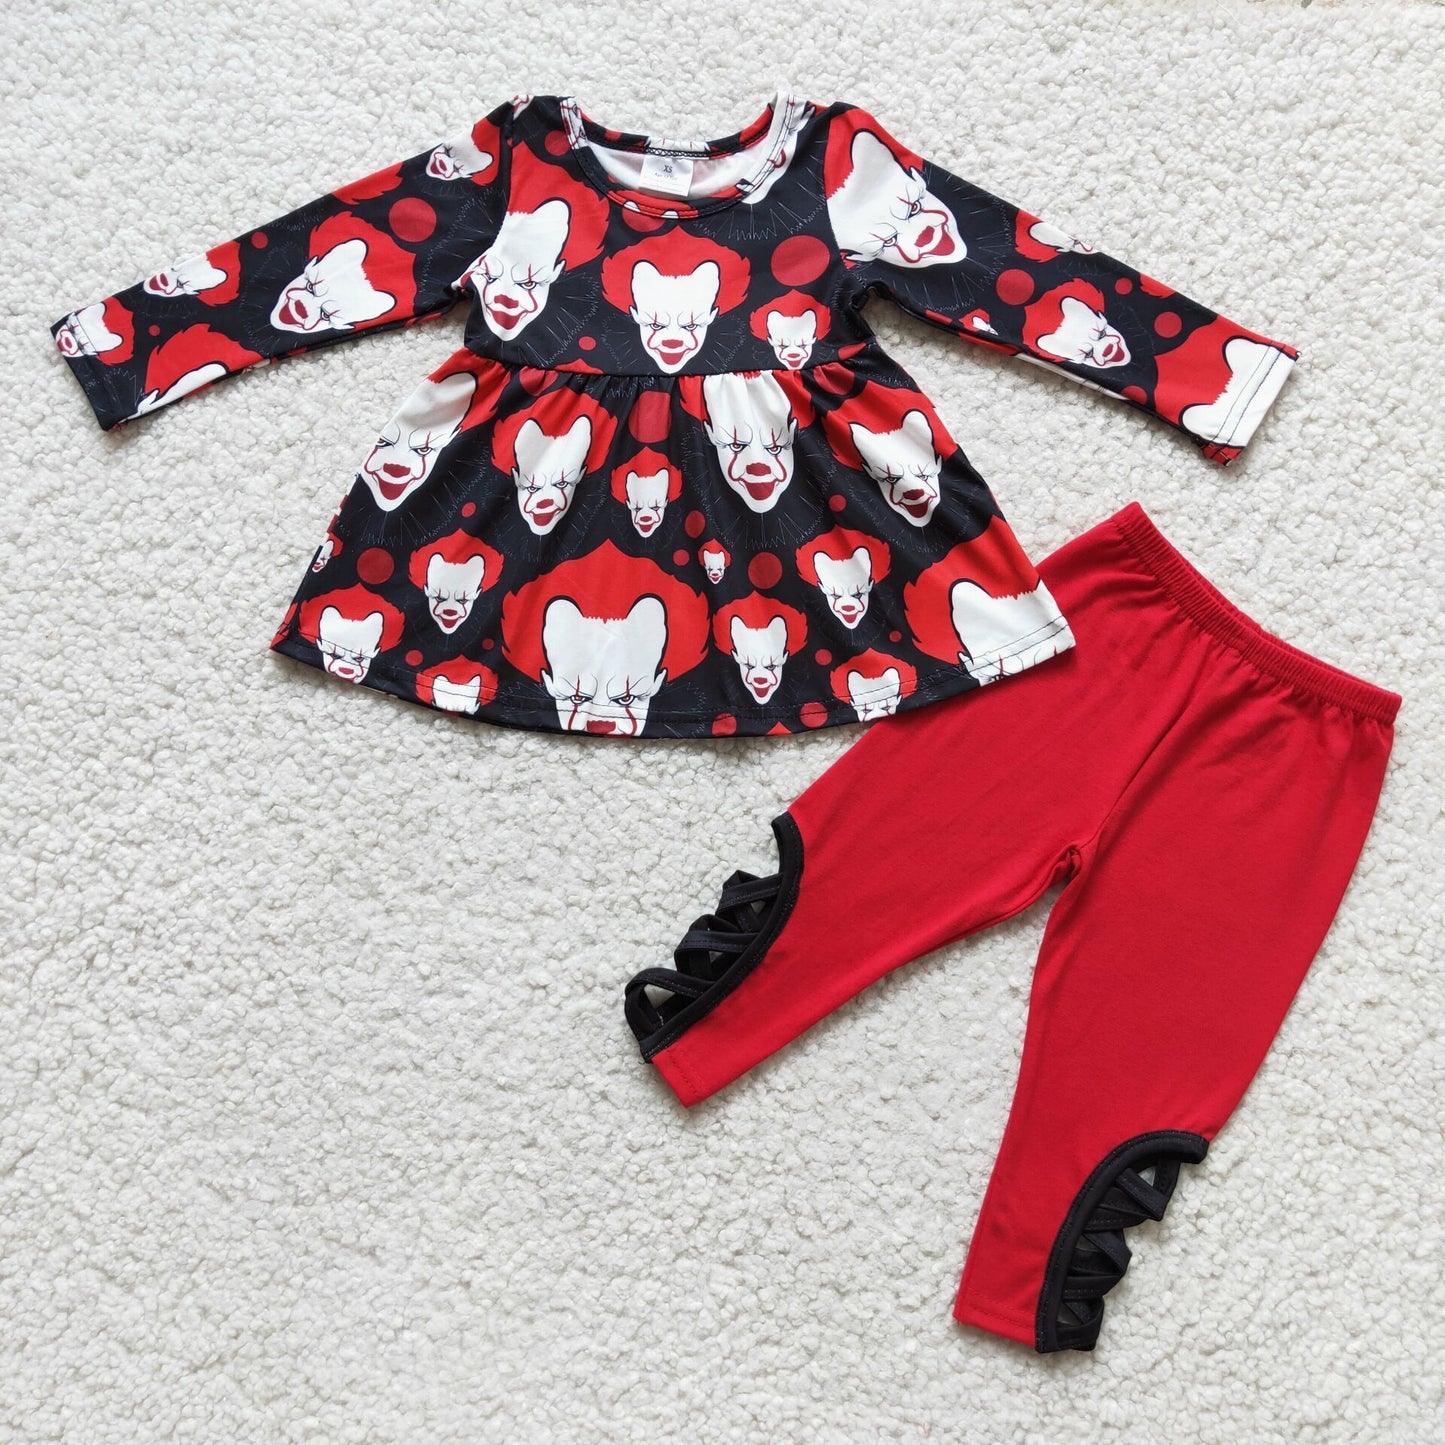 New arrival girls Halloween outfit